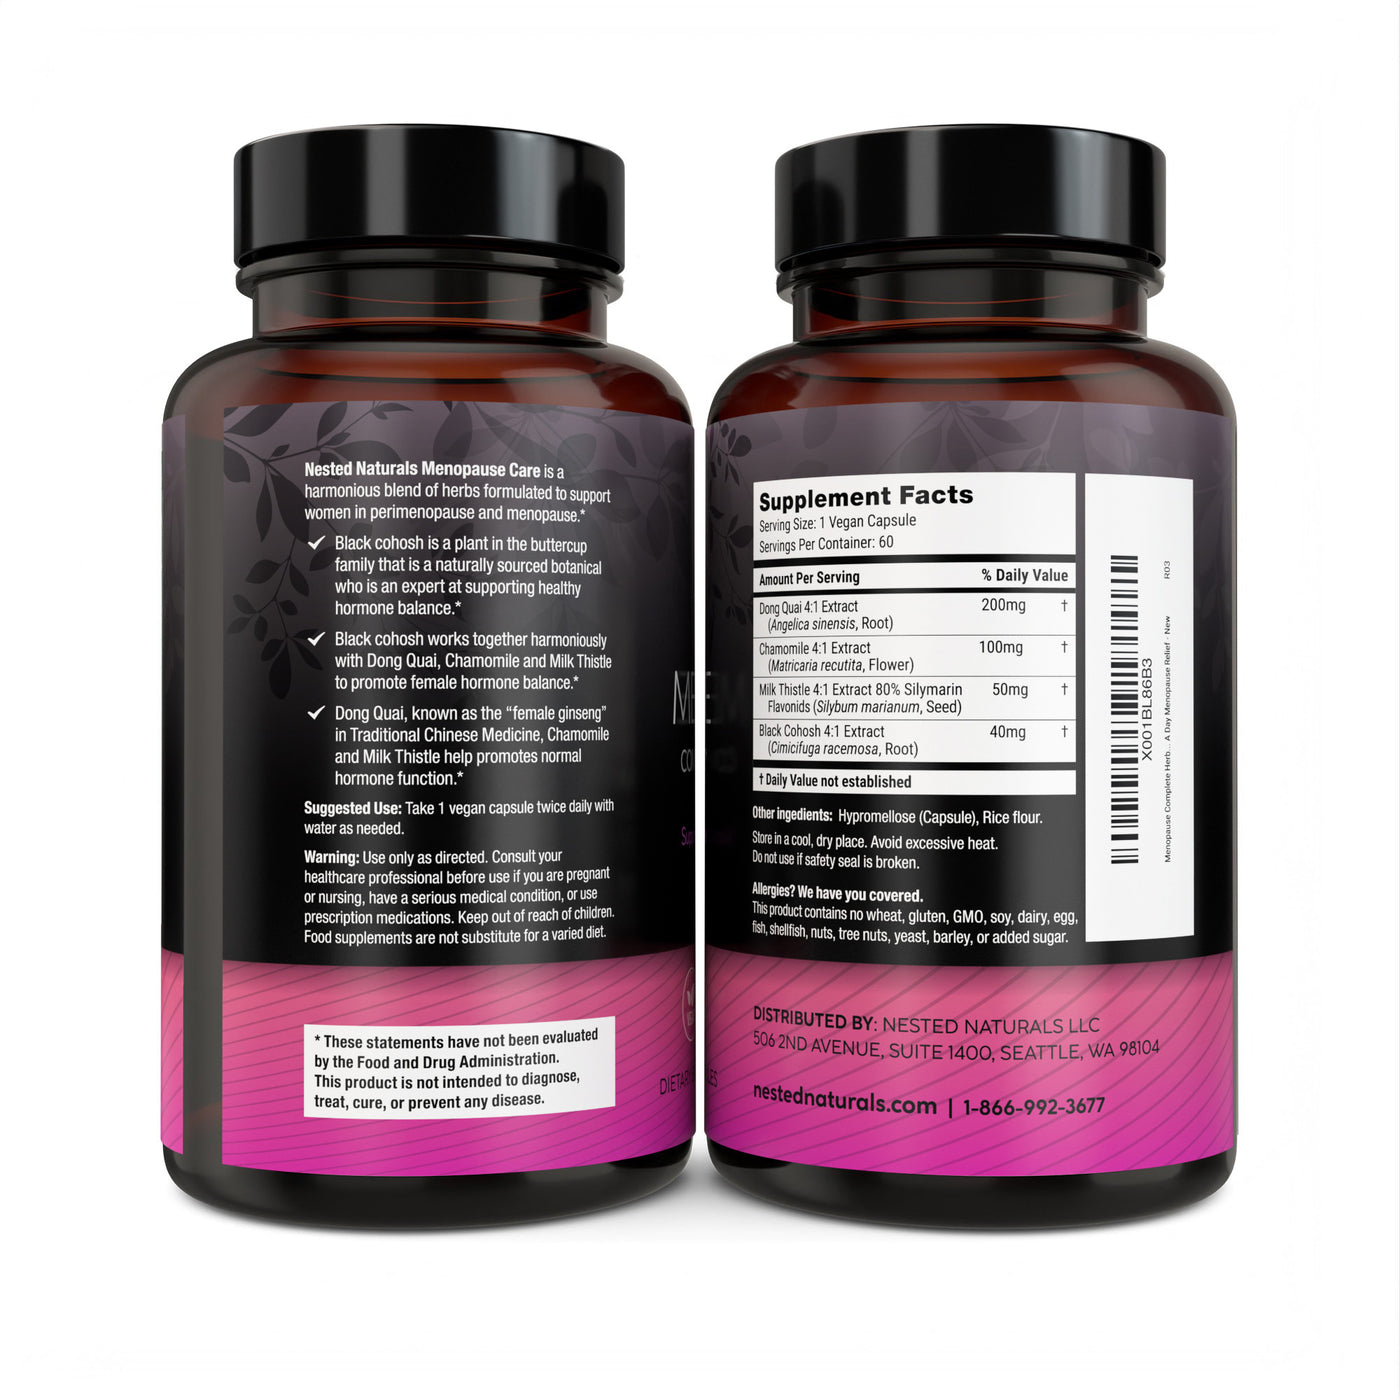 Menopause Supplement Complete Herbal Care